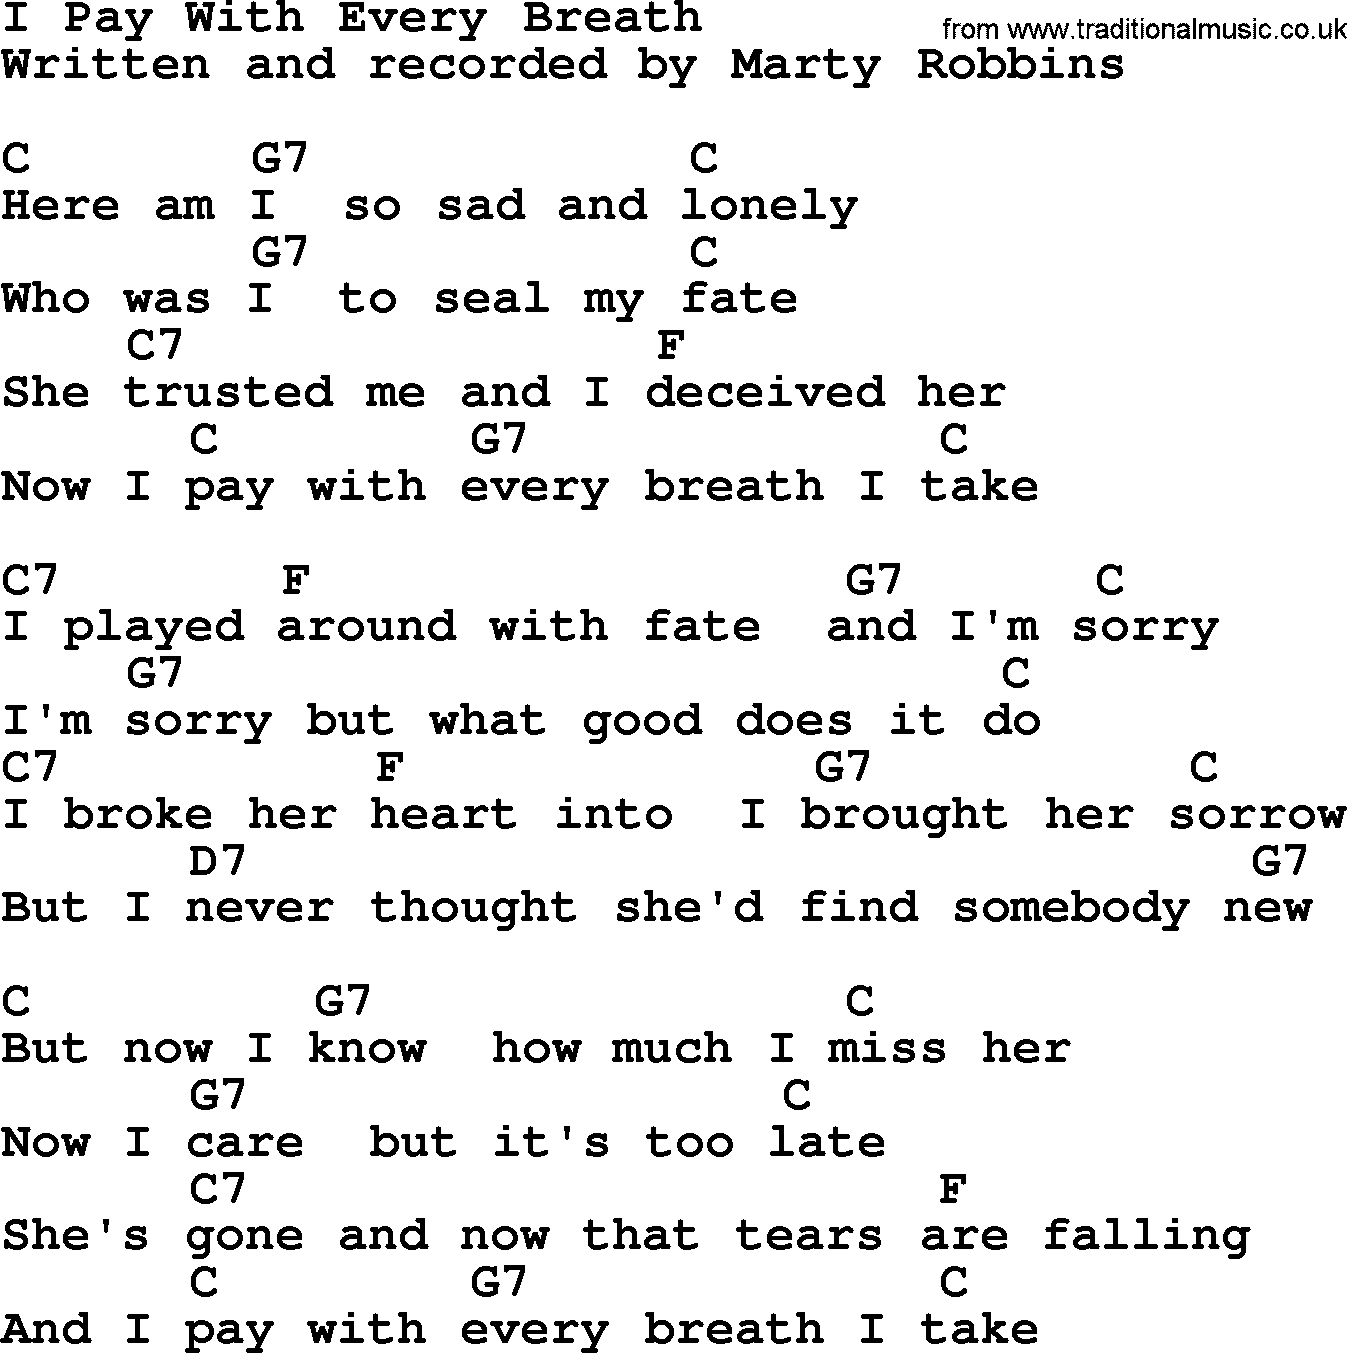 Marty Robbins song: I Pay With Every Breath, lyrics and chords